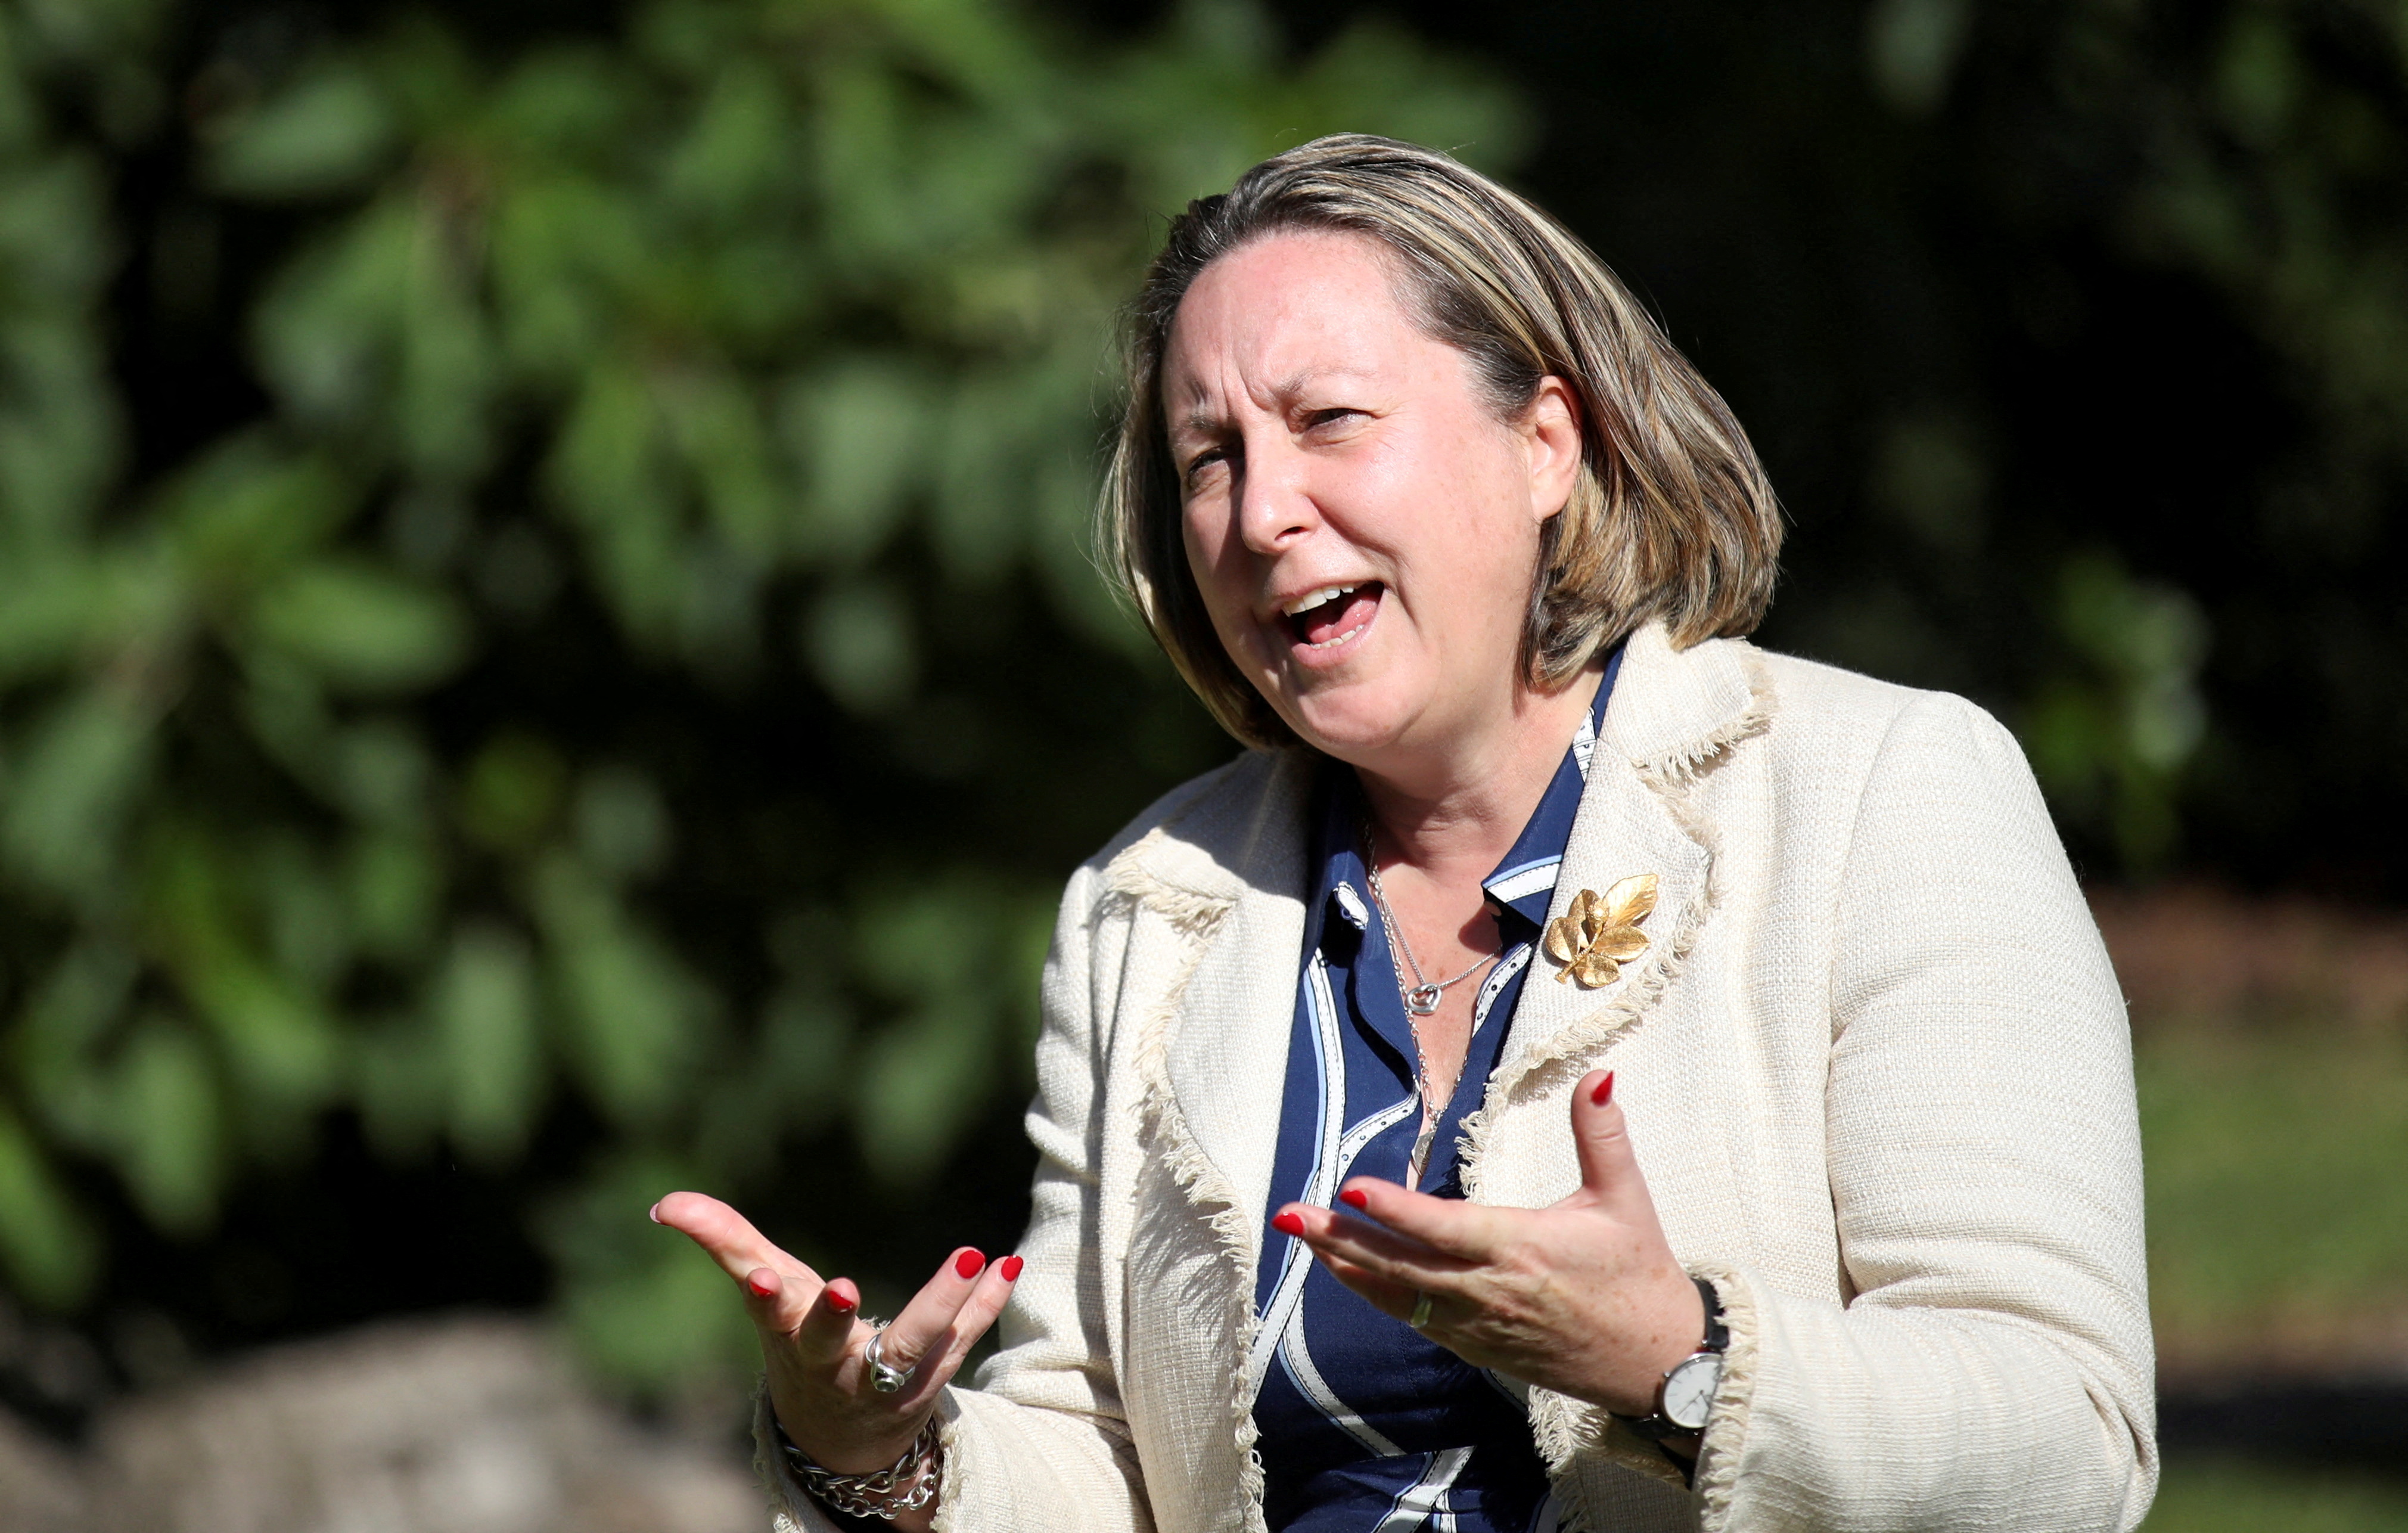 Britain's trade minister Anne-Marie Trevelyan speaks during an interview with Reuters, in Rome, Italy, October 13, 2021. REUTERS/Yara Nardi